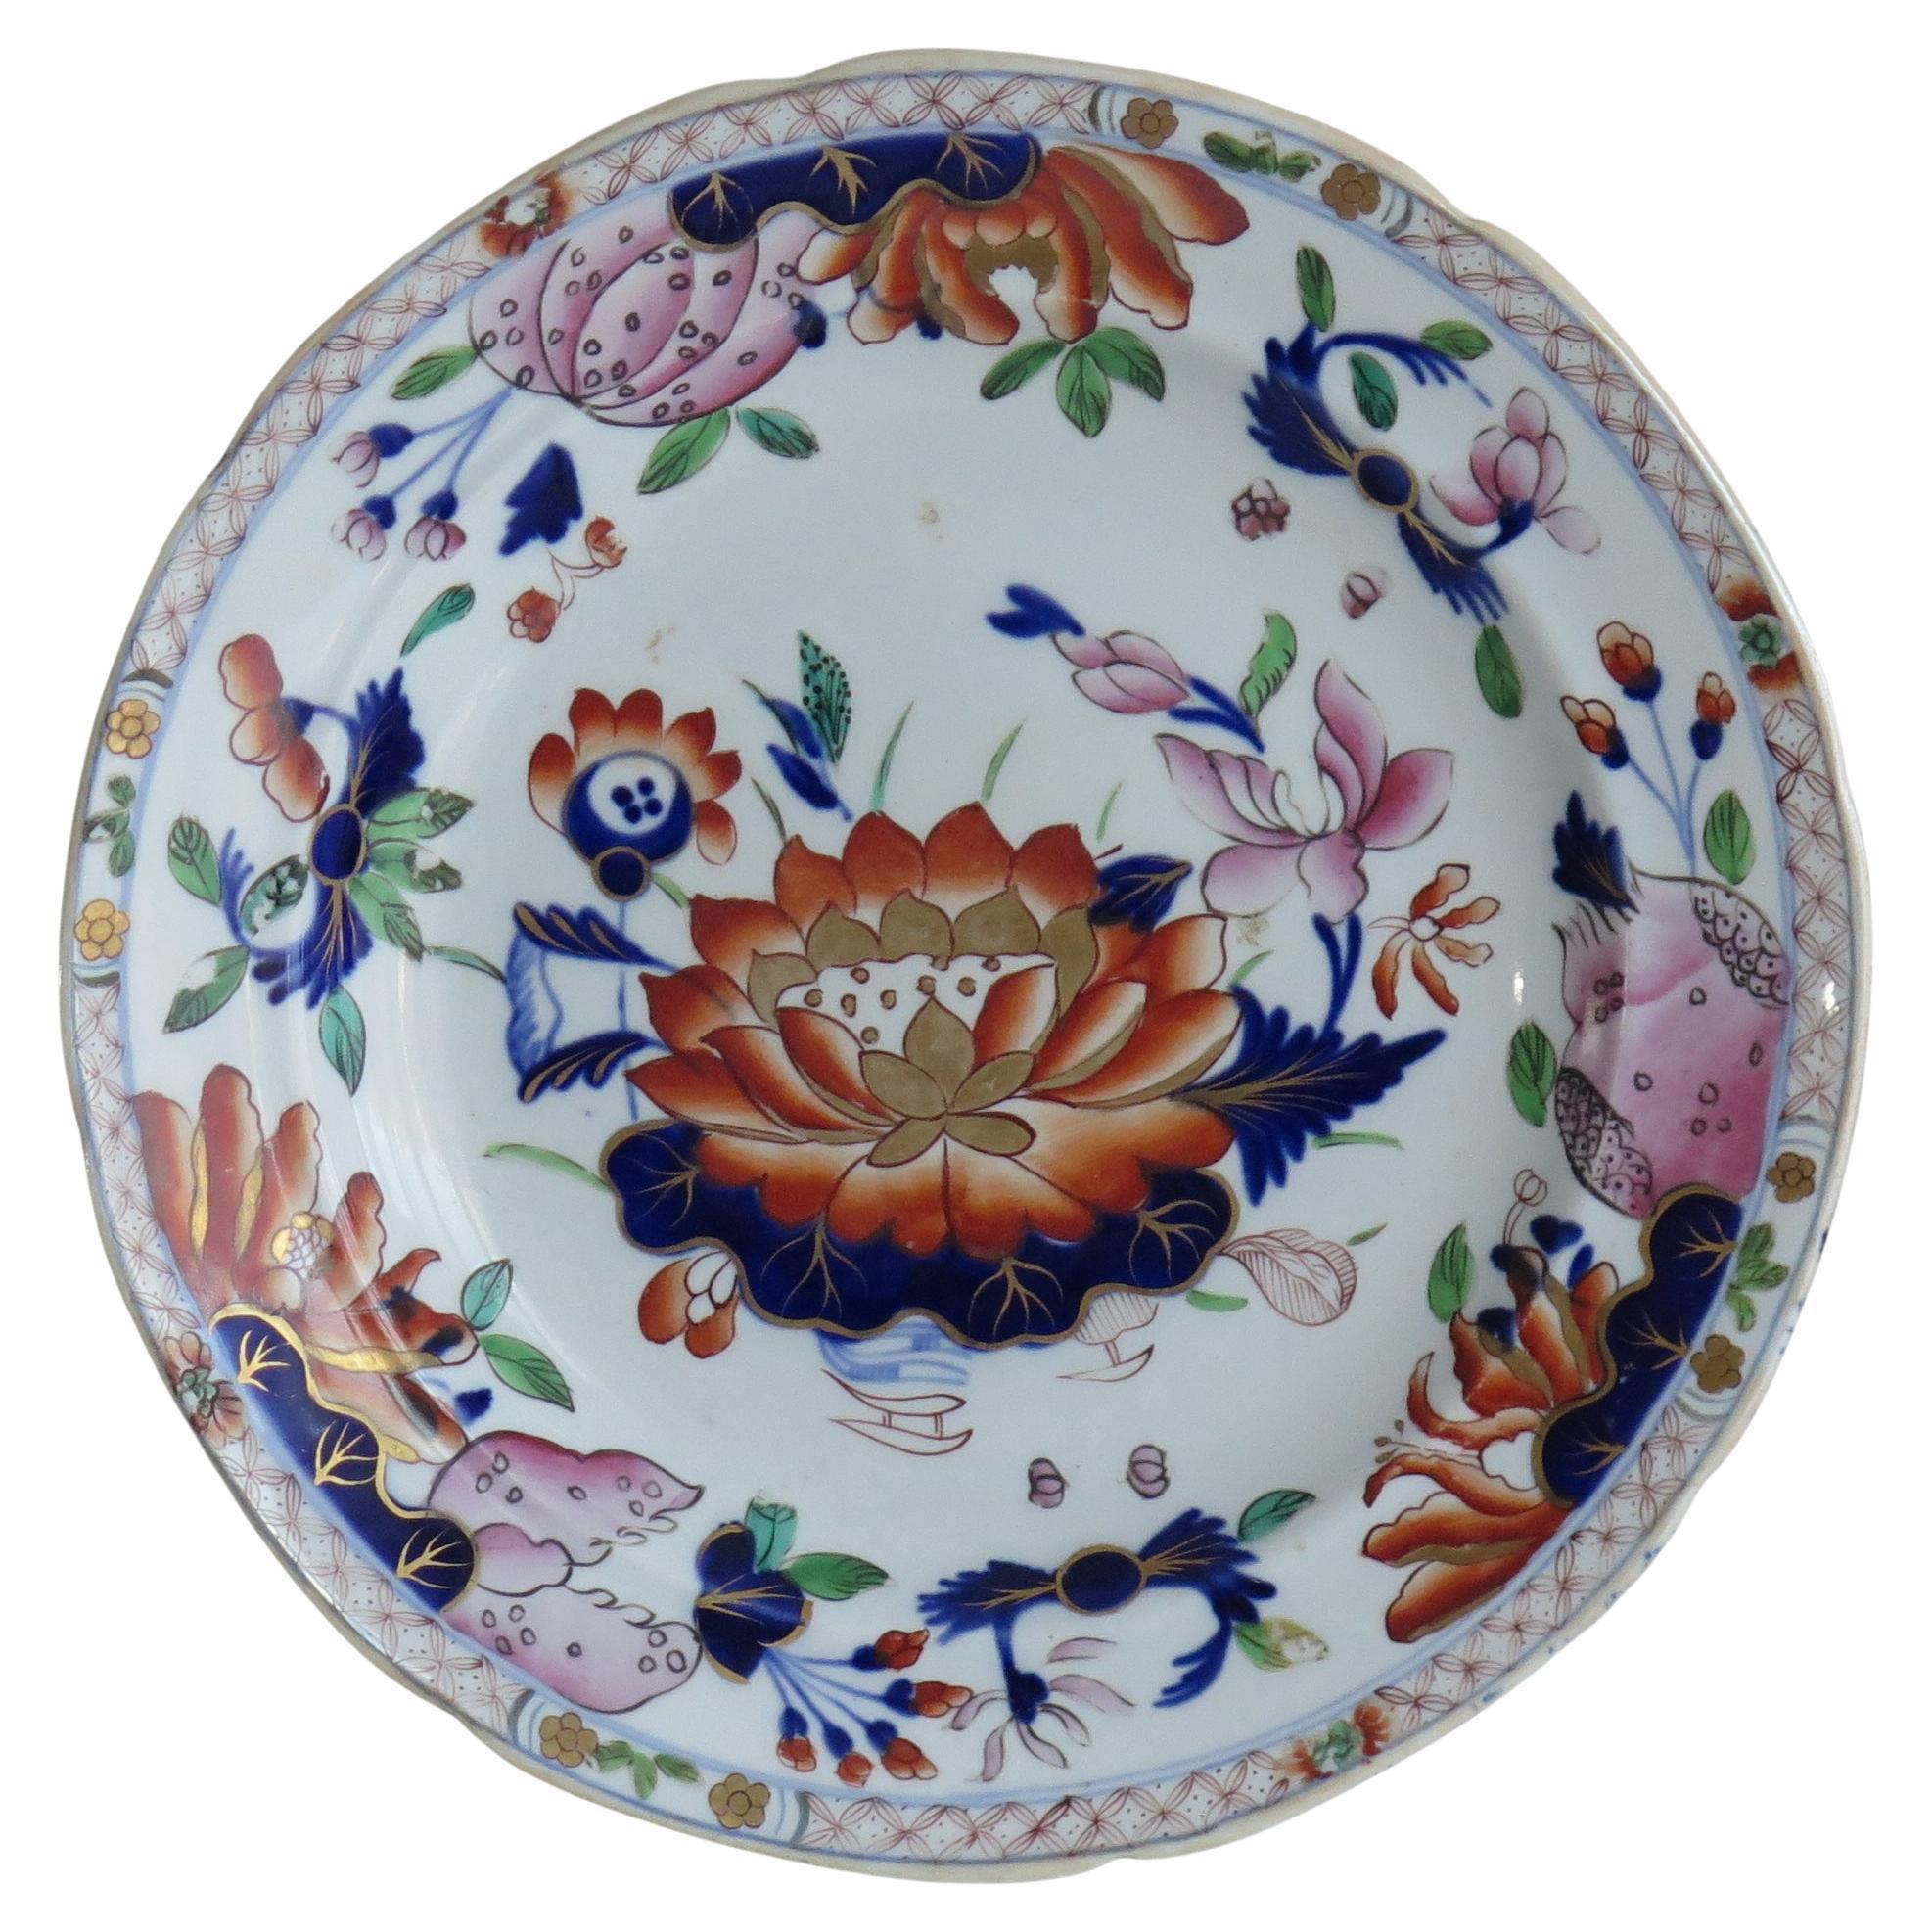 Fine Mason's Ironstone Dinner Plate in Water Lily Pattern, circa 1835